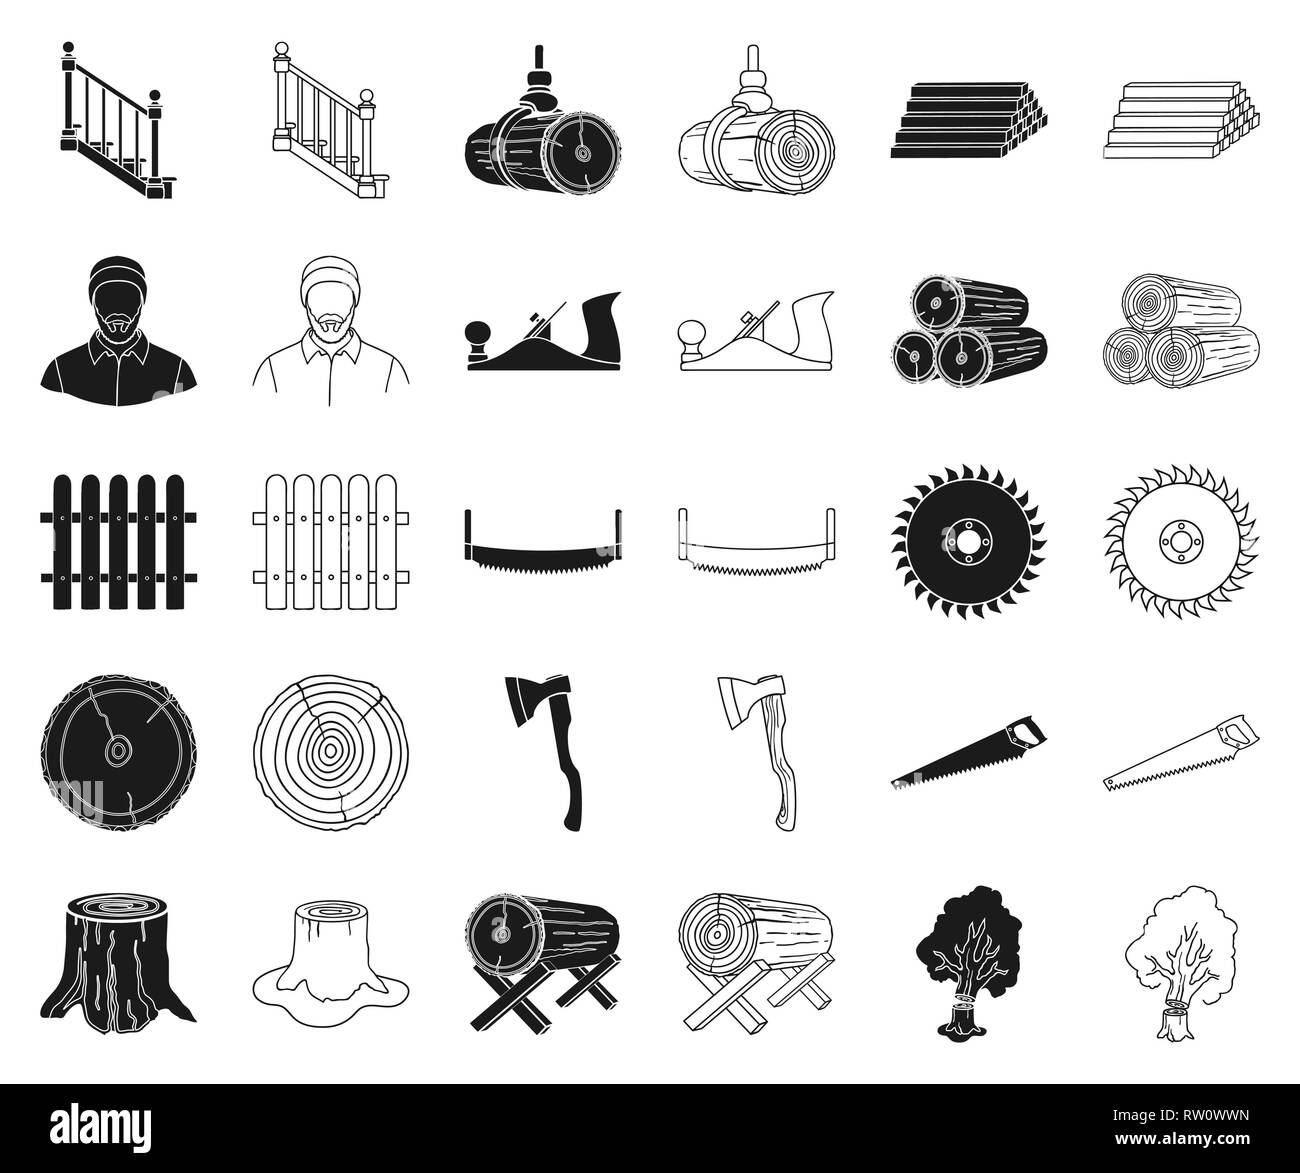 art,axe,black,outline,chisel,collection,crane,cross,design,disc,equipment,falling,fence,goats,hand,hydraulic,icon,illustration,isolated,jack,logo,logs,lumber,lumbers,lumbrejack,plane,processing,product,production,saw,sawing,sawmill,section,set,sign,stack,stairs,stump,symbol,timber,tools,tree,two-man,vector,web Vector Vectors , Stock Vector